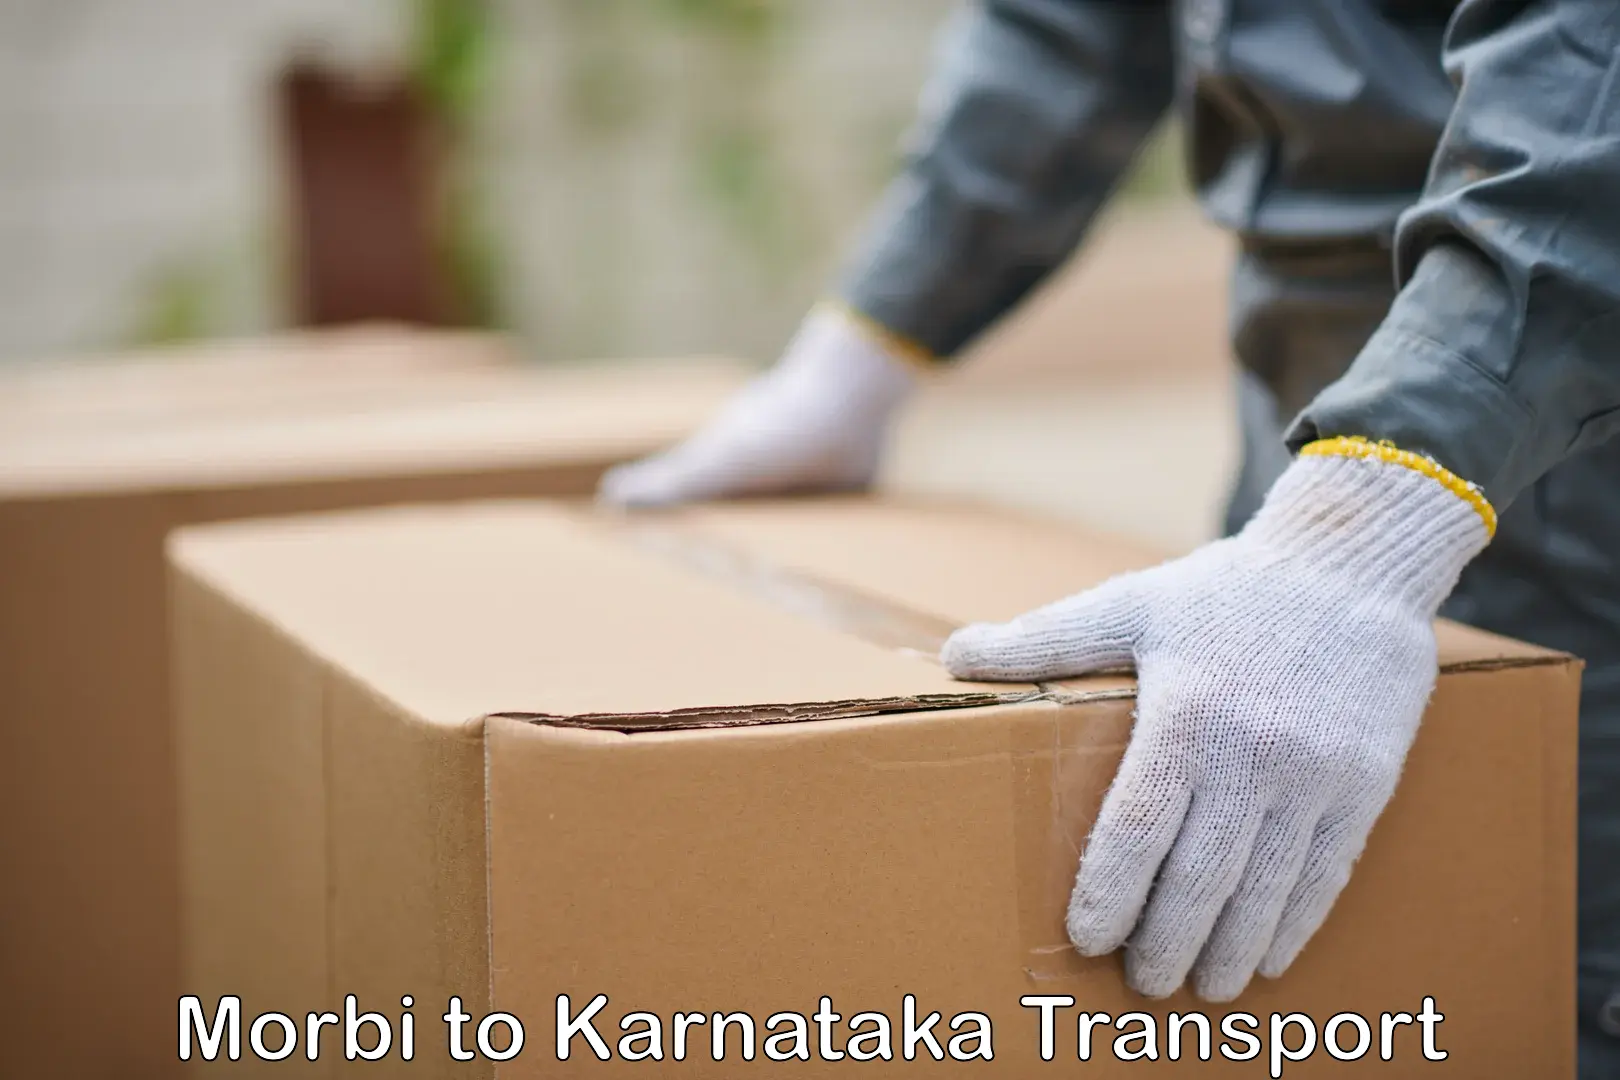 Transport bike from one state to another Morbi to Karnataka